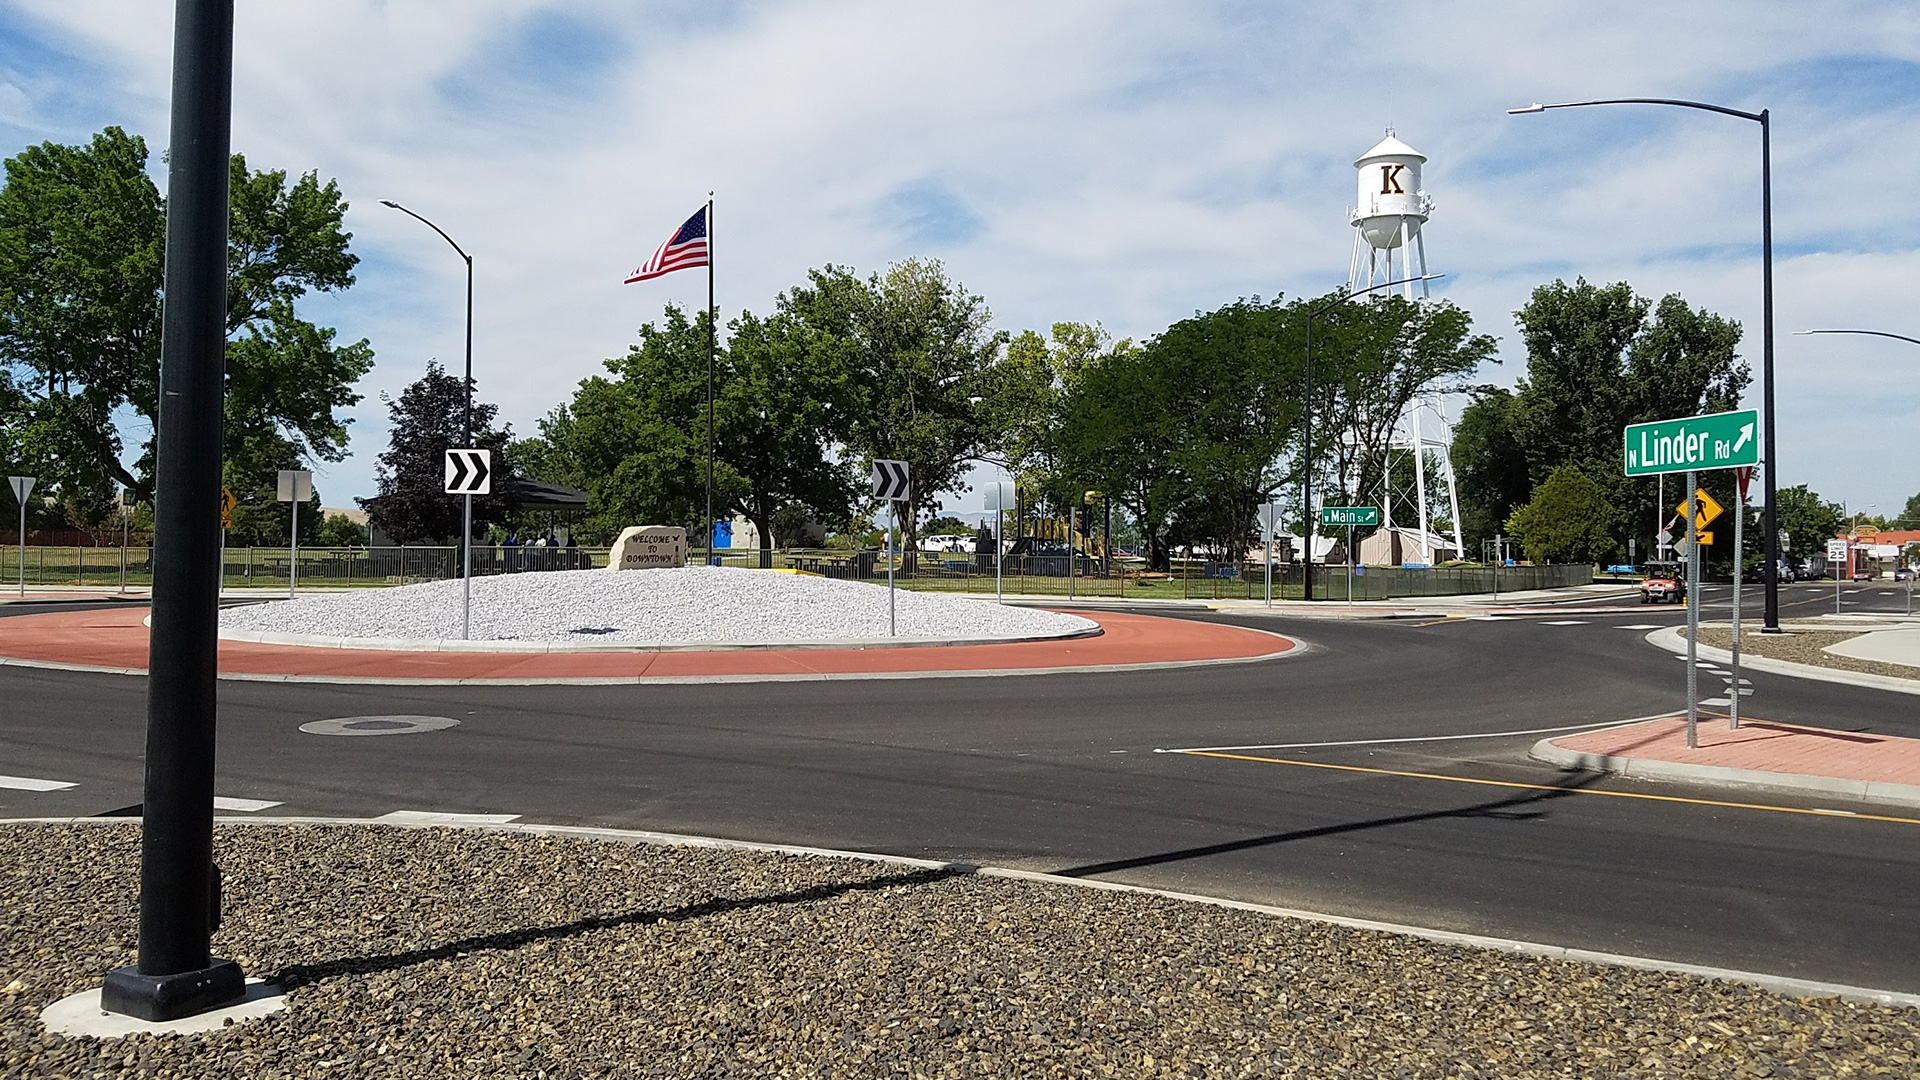 Linder-3rd-Roundabout-Ground